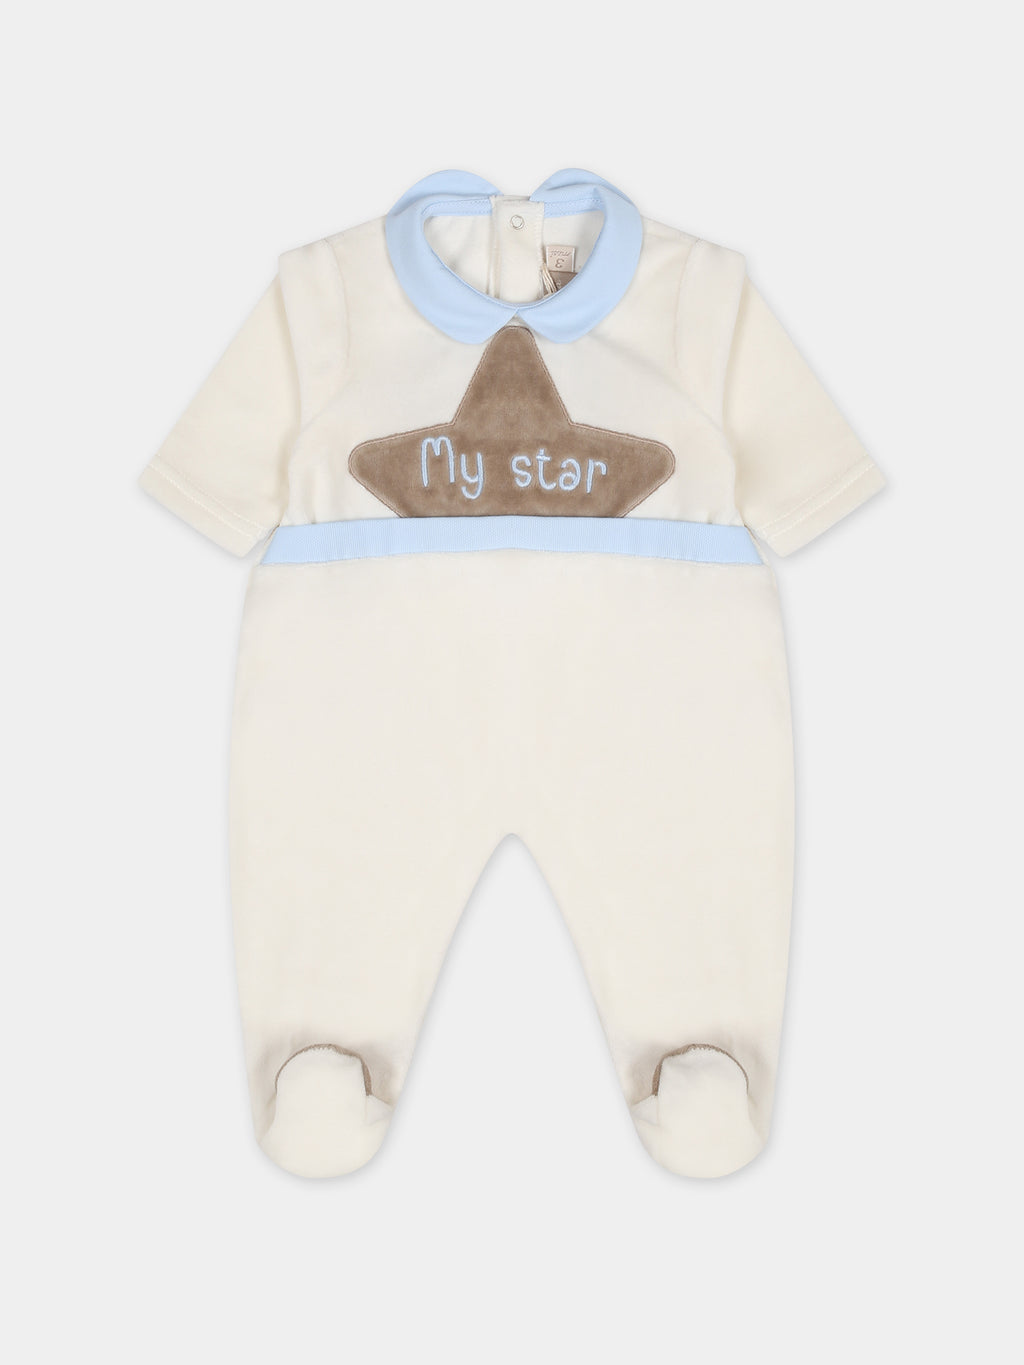 White babygrow for baby boy with star